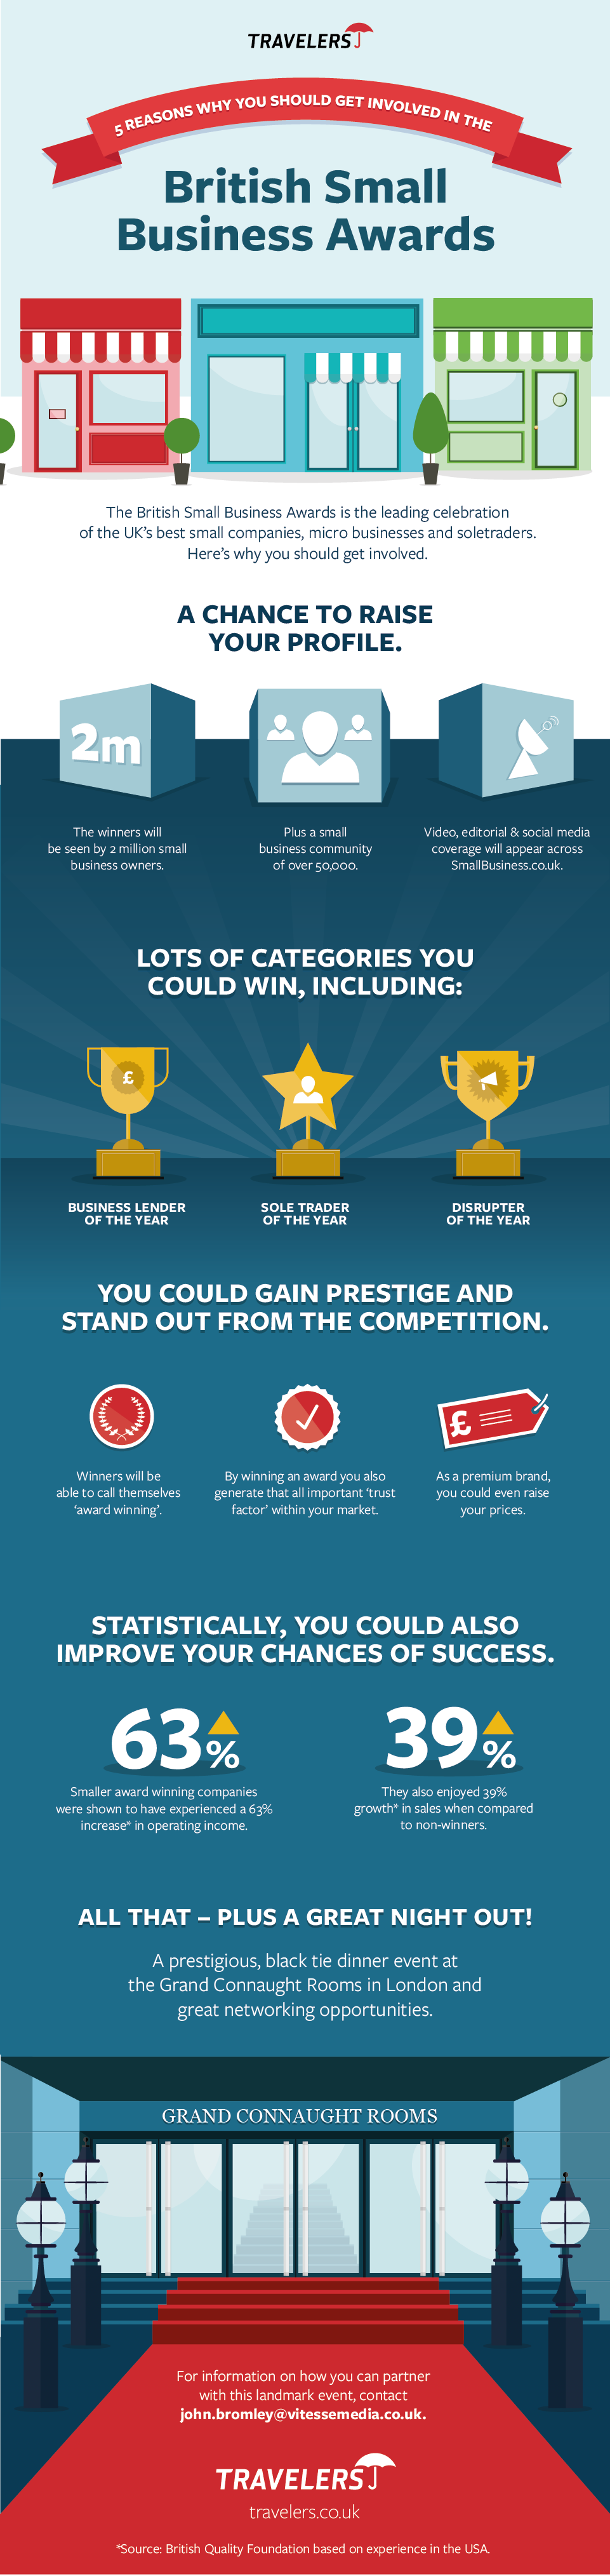 British Small Business Awards infographic